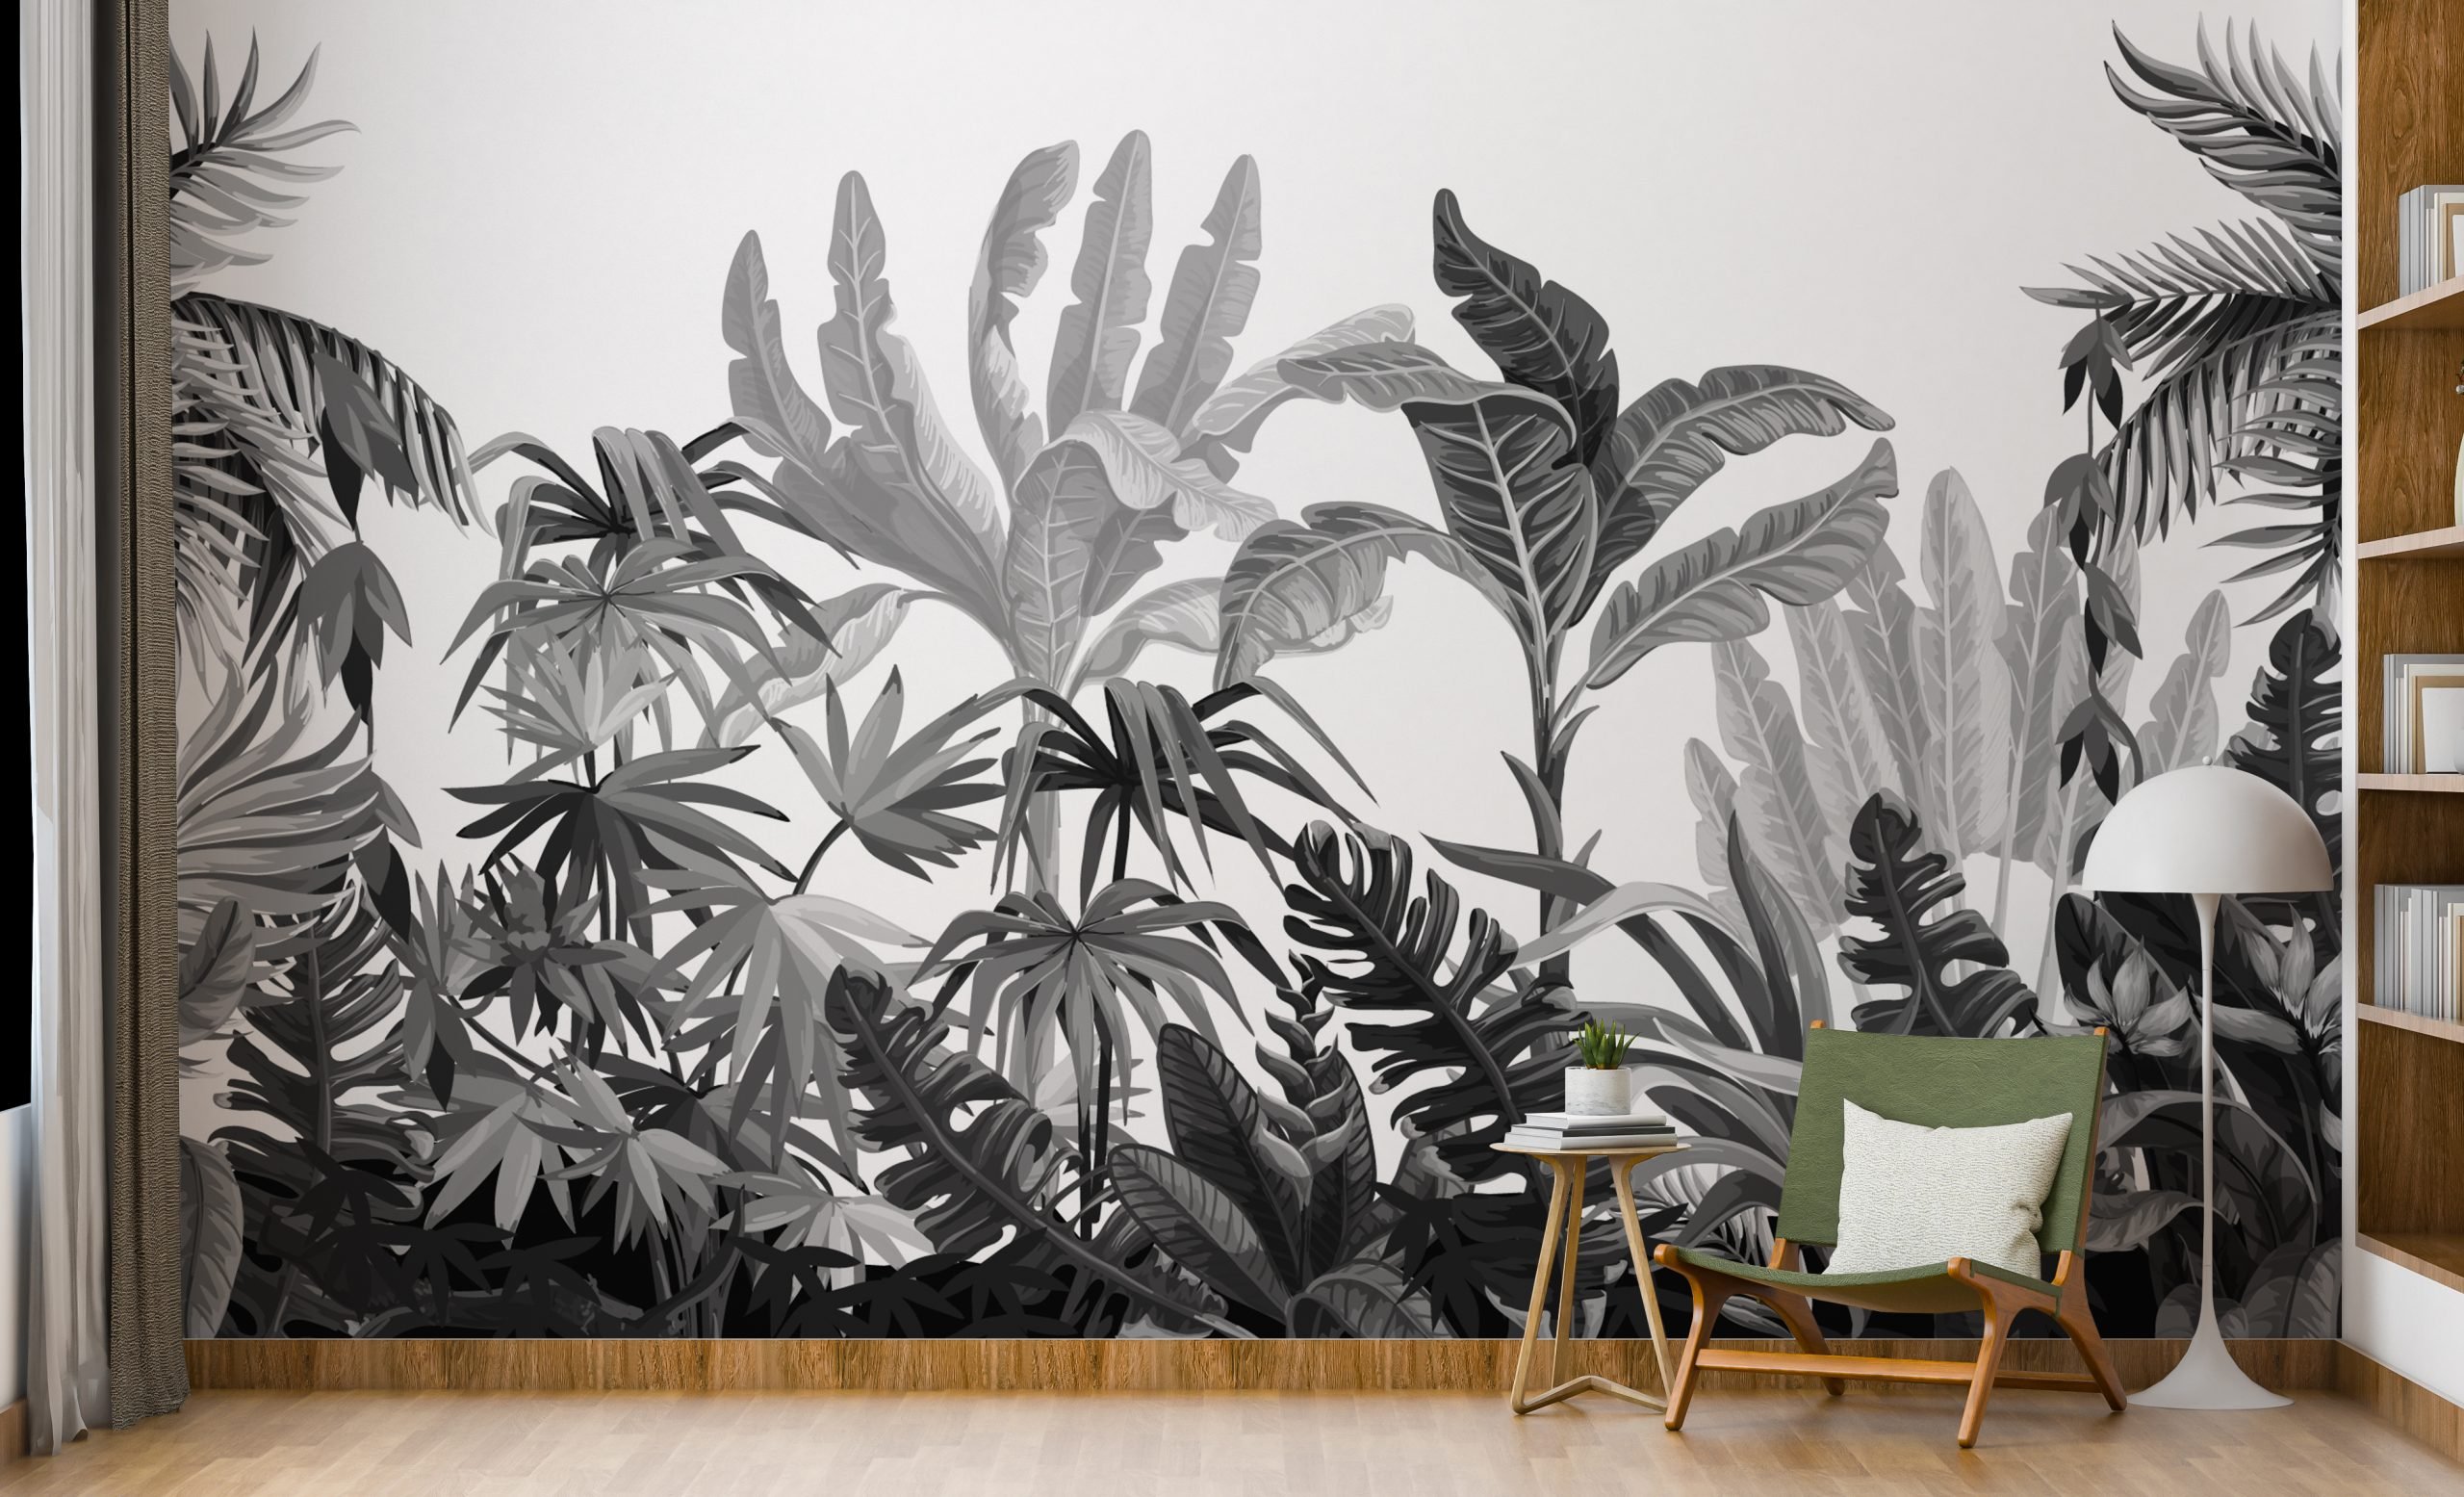 How Black and White Wallpaper Transforms Any Room